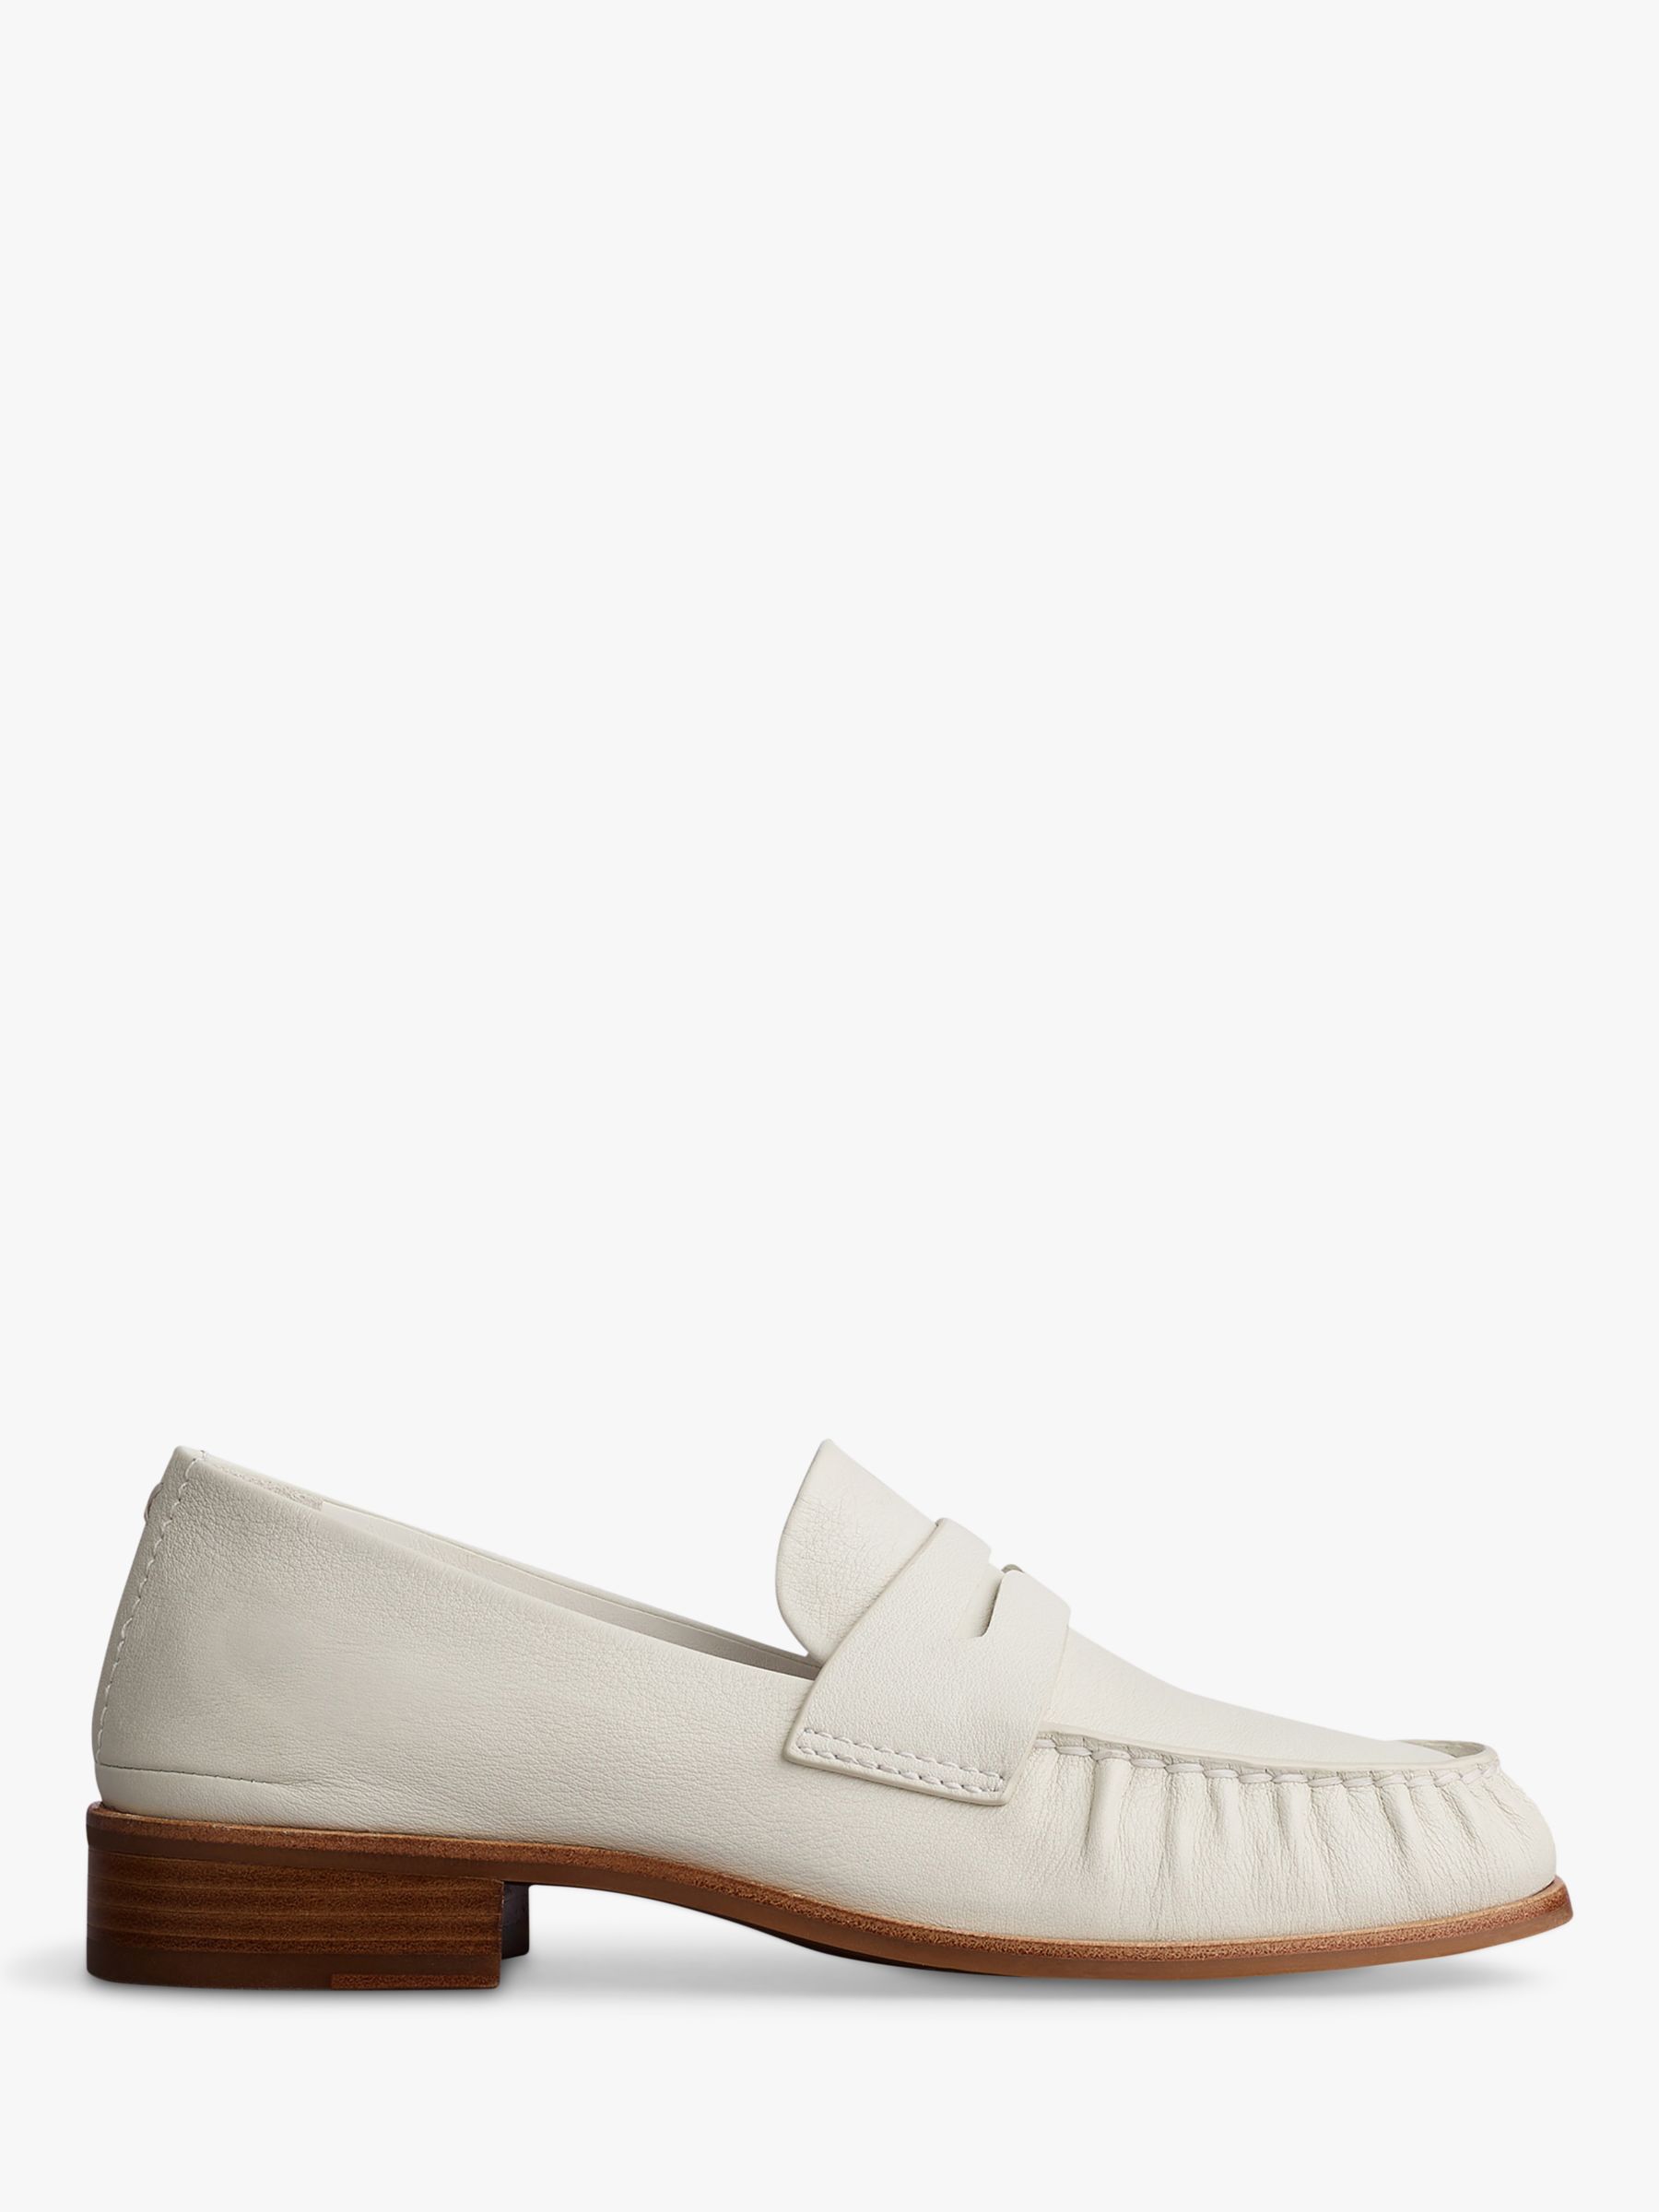 rag & bone Sid Leather Loafers, Antique White, 4